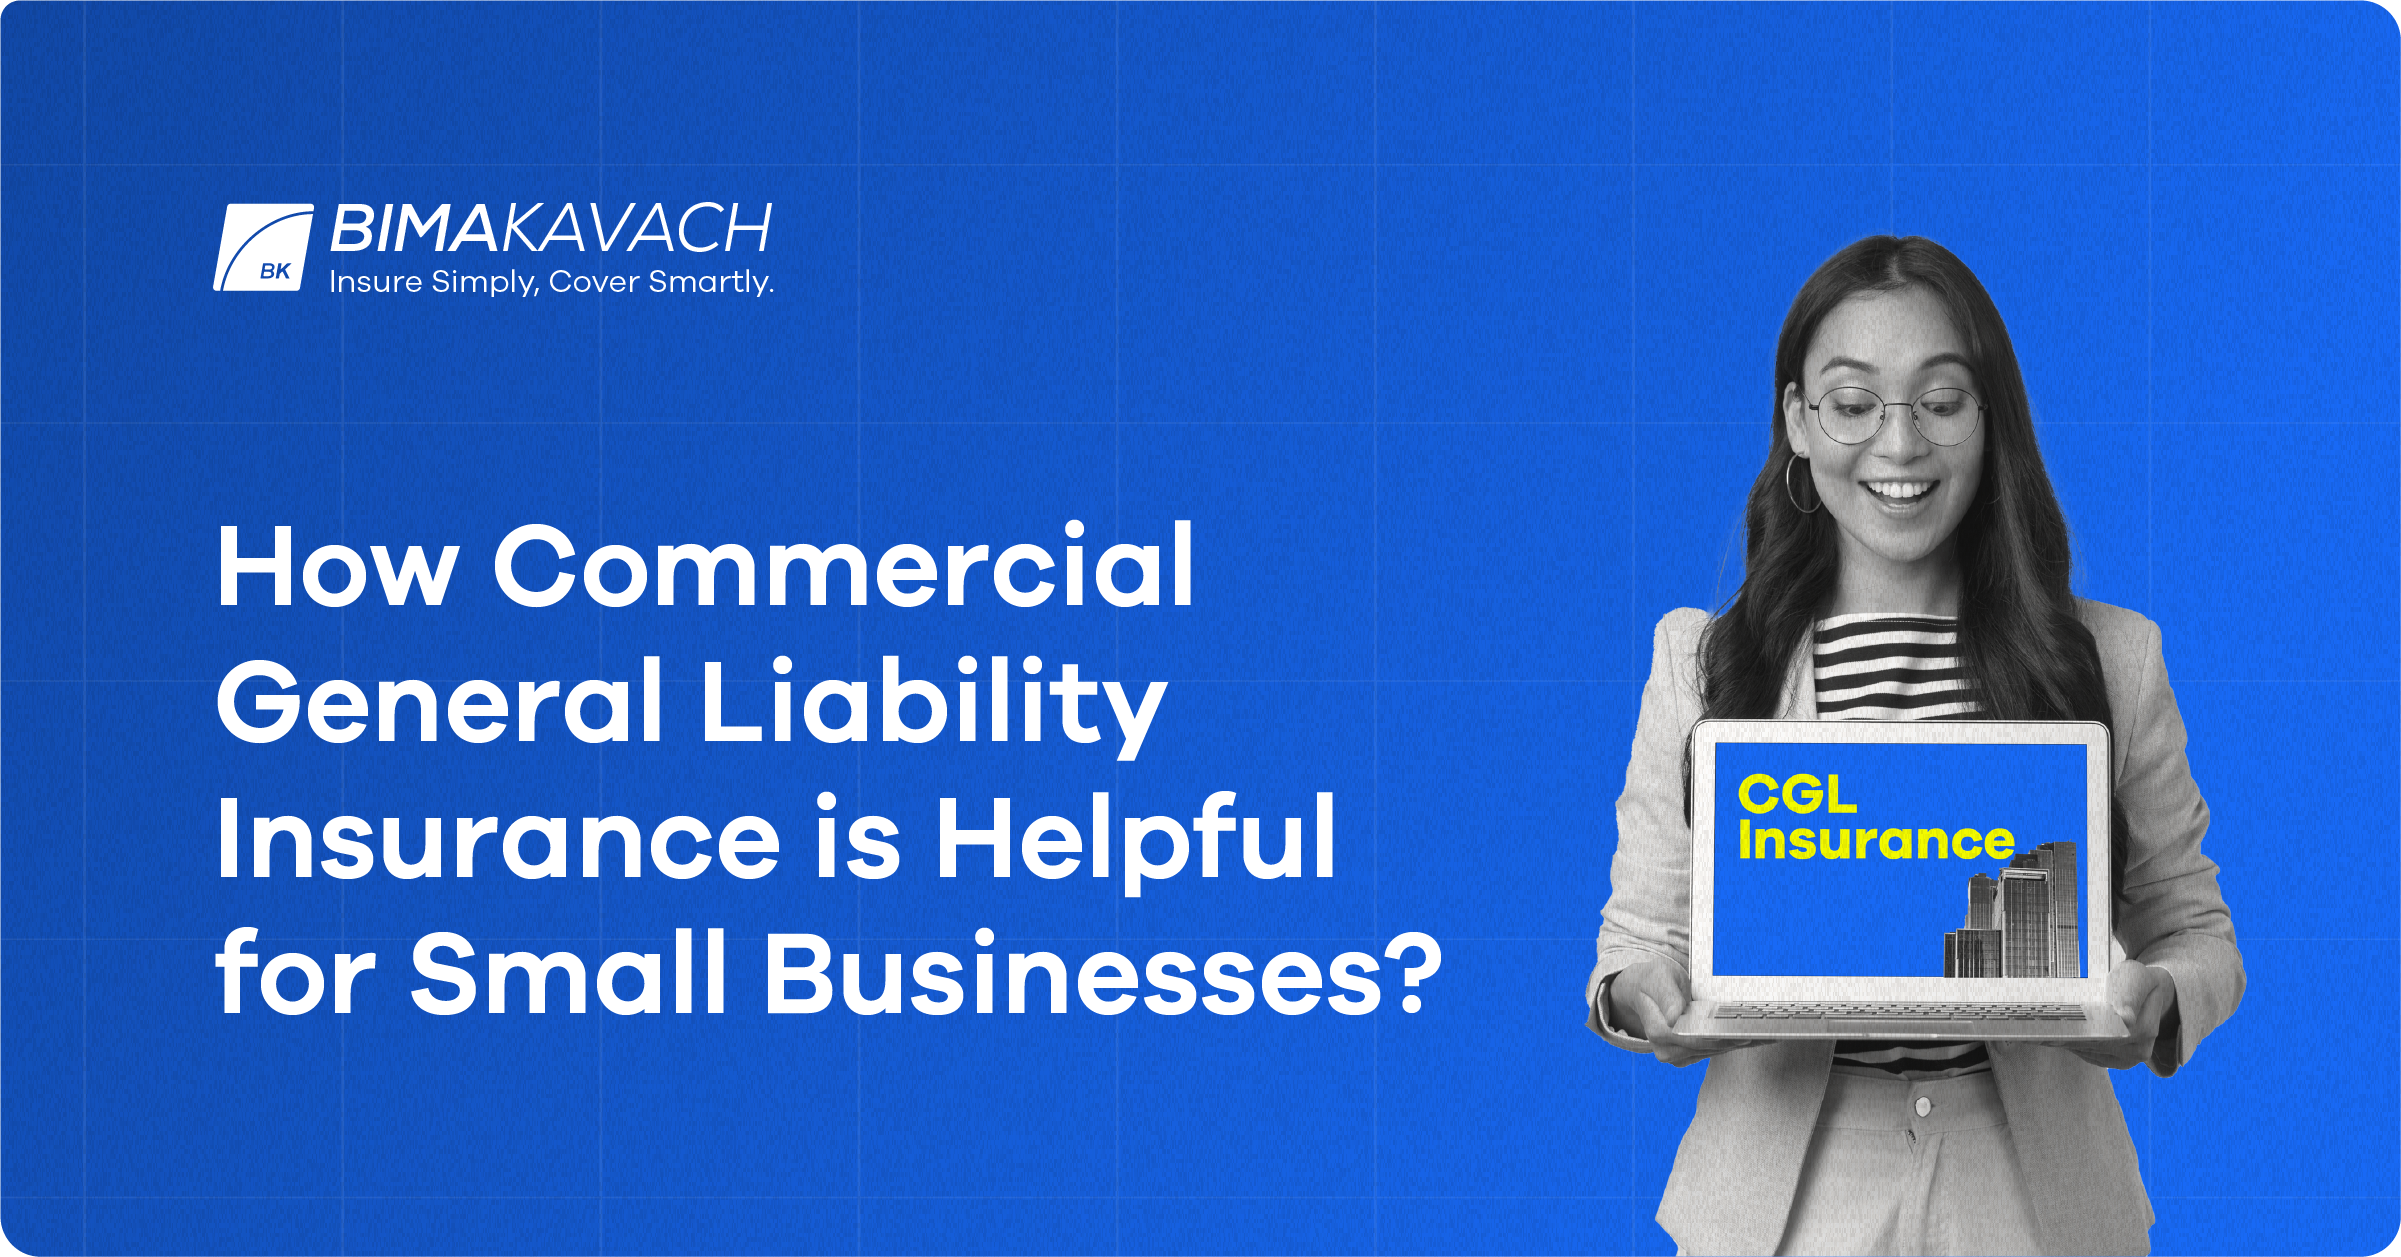 How CGL Insurance is Helpful for Small Businesses?